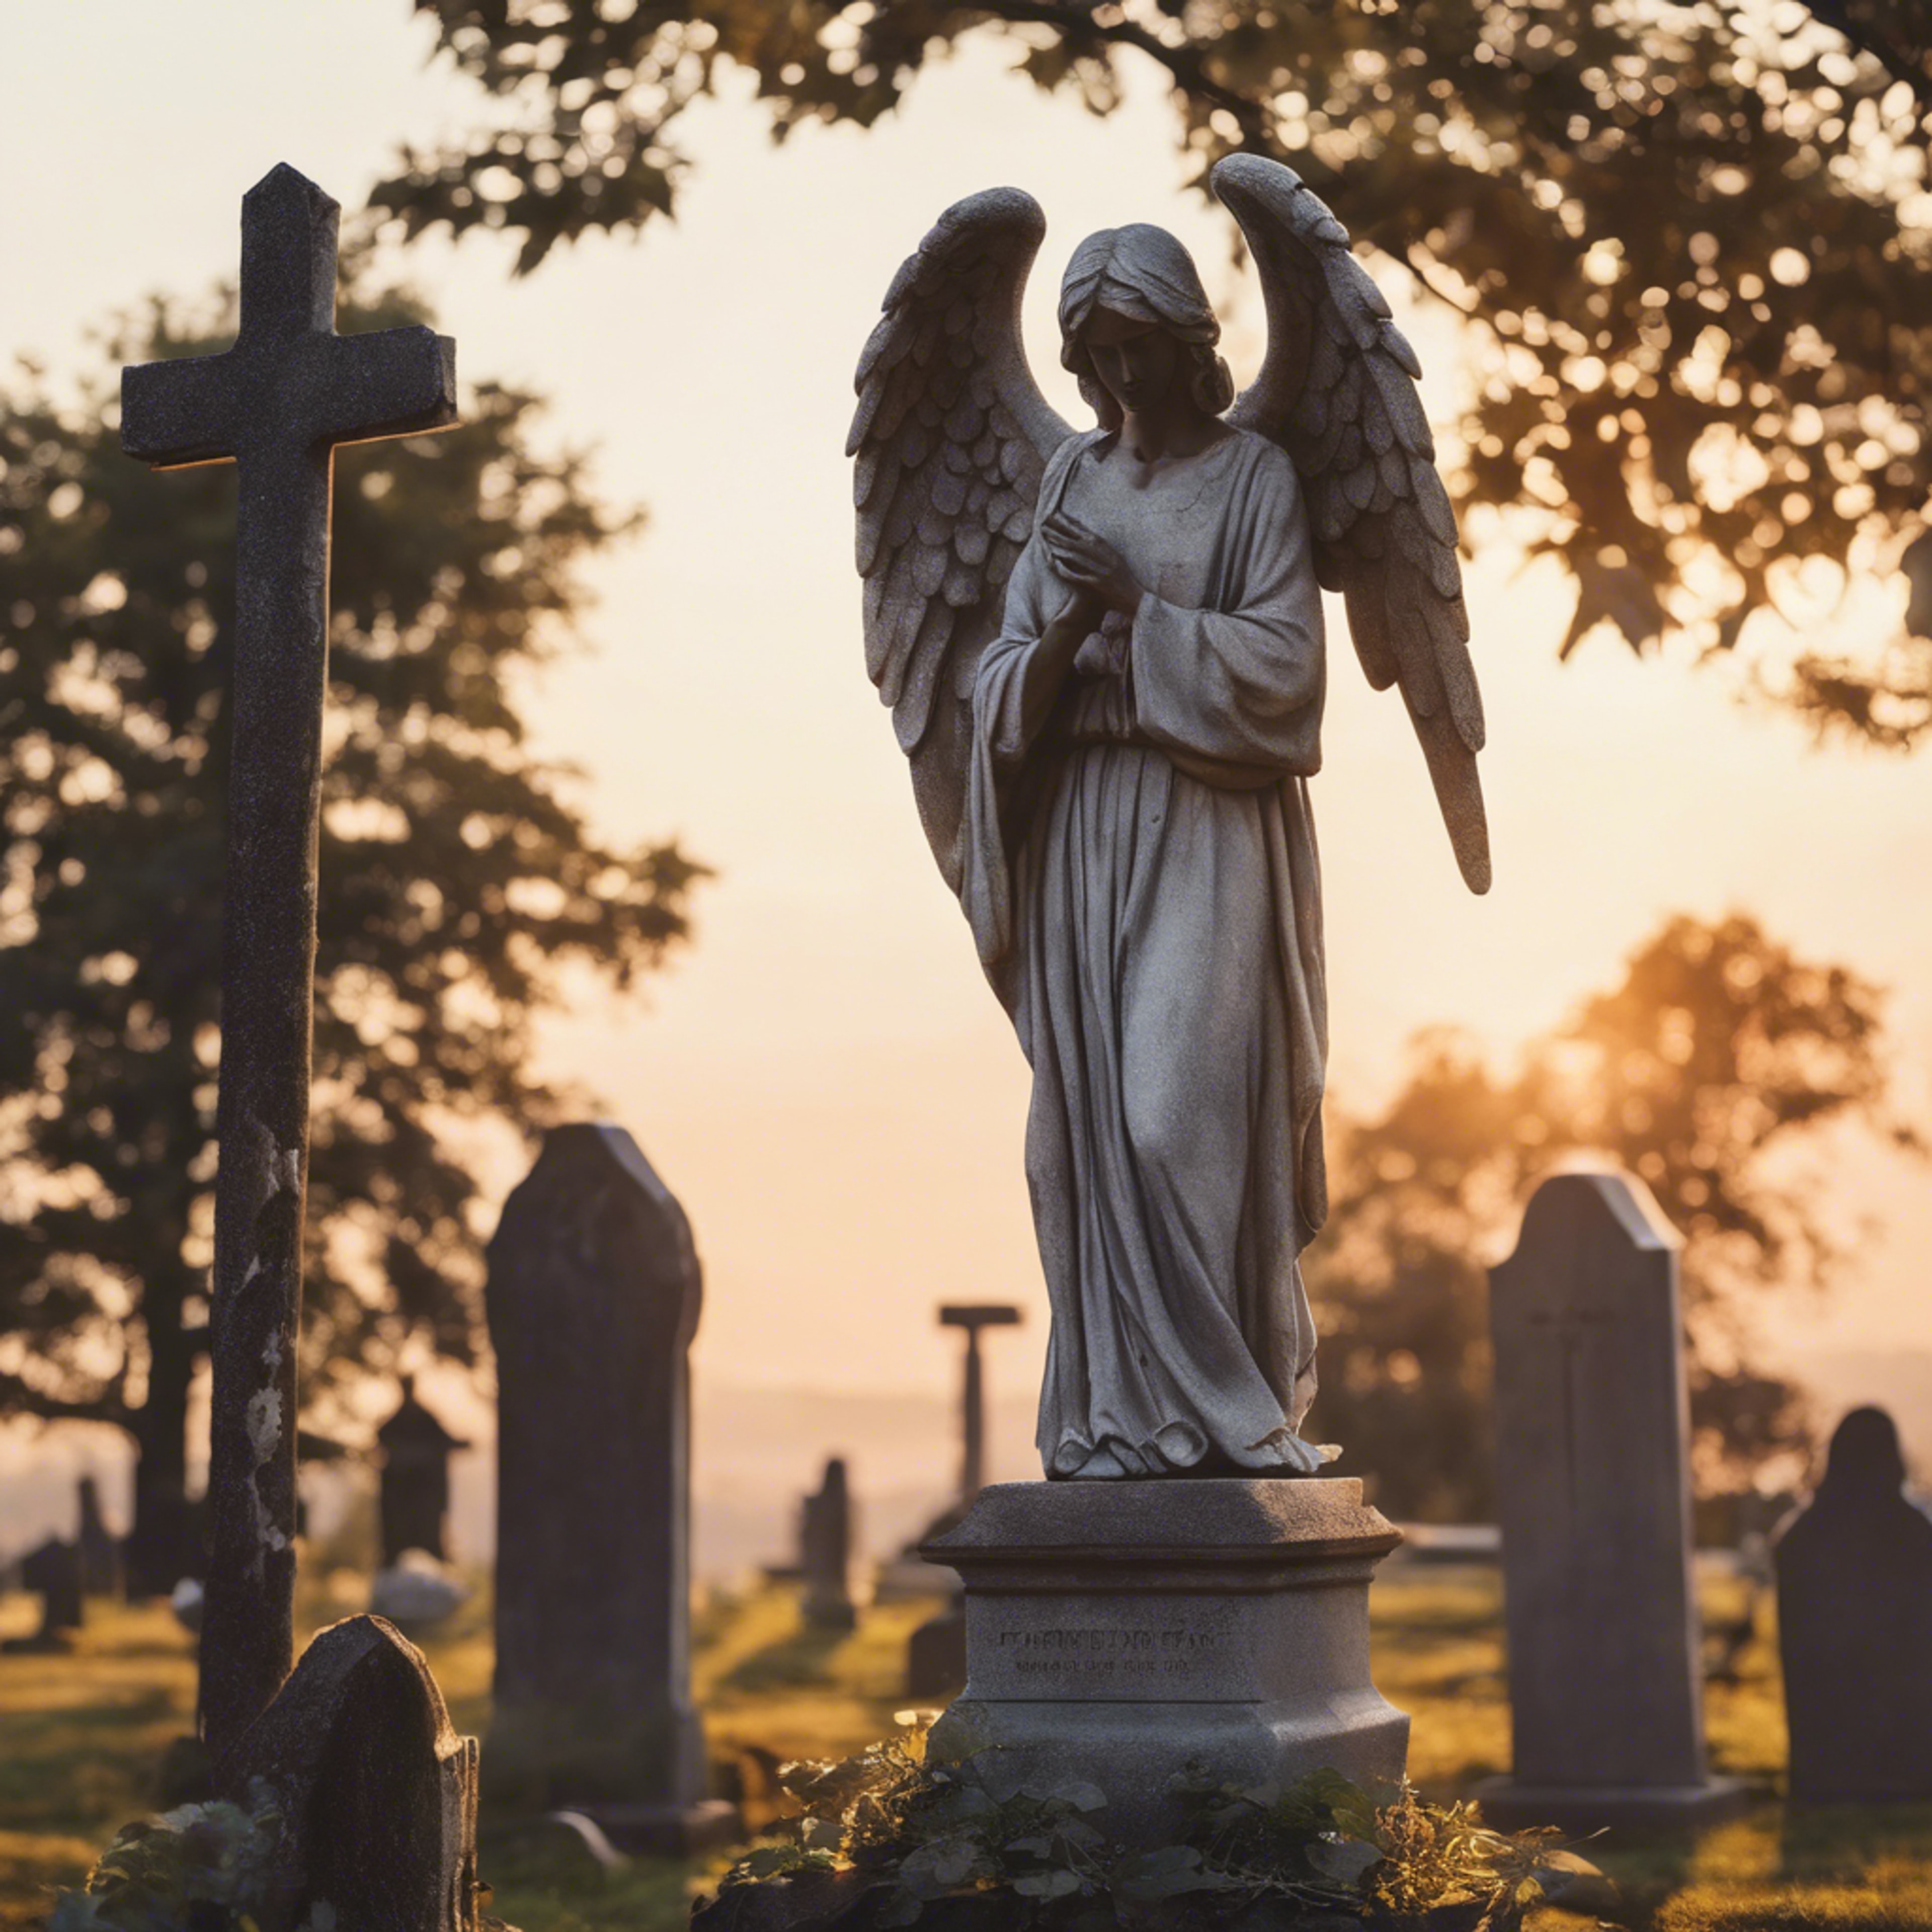 A peaceful graveyard scene with a stone angel statue guarding over the resting place under a serene sunset. Wallpaper[5f1d382335d645bc8b2f]